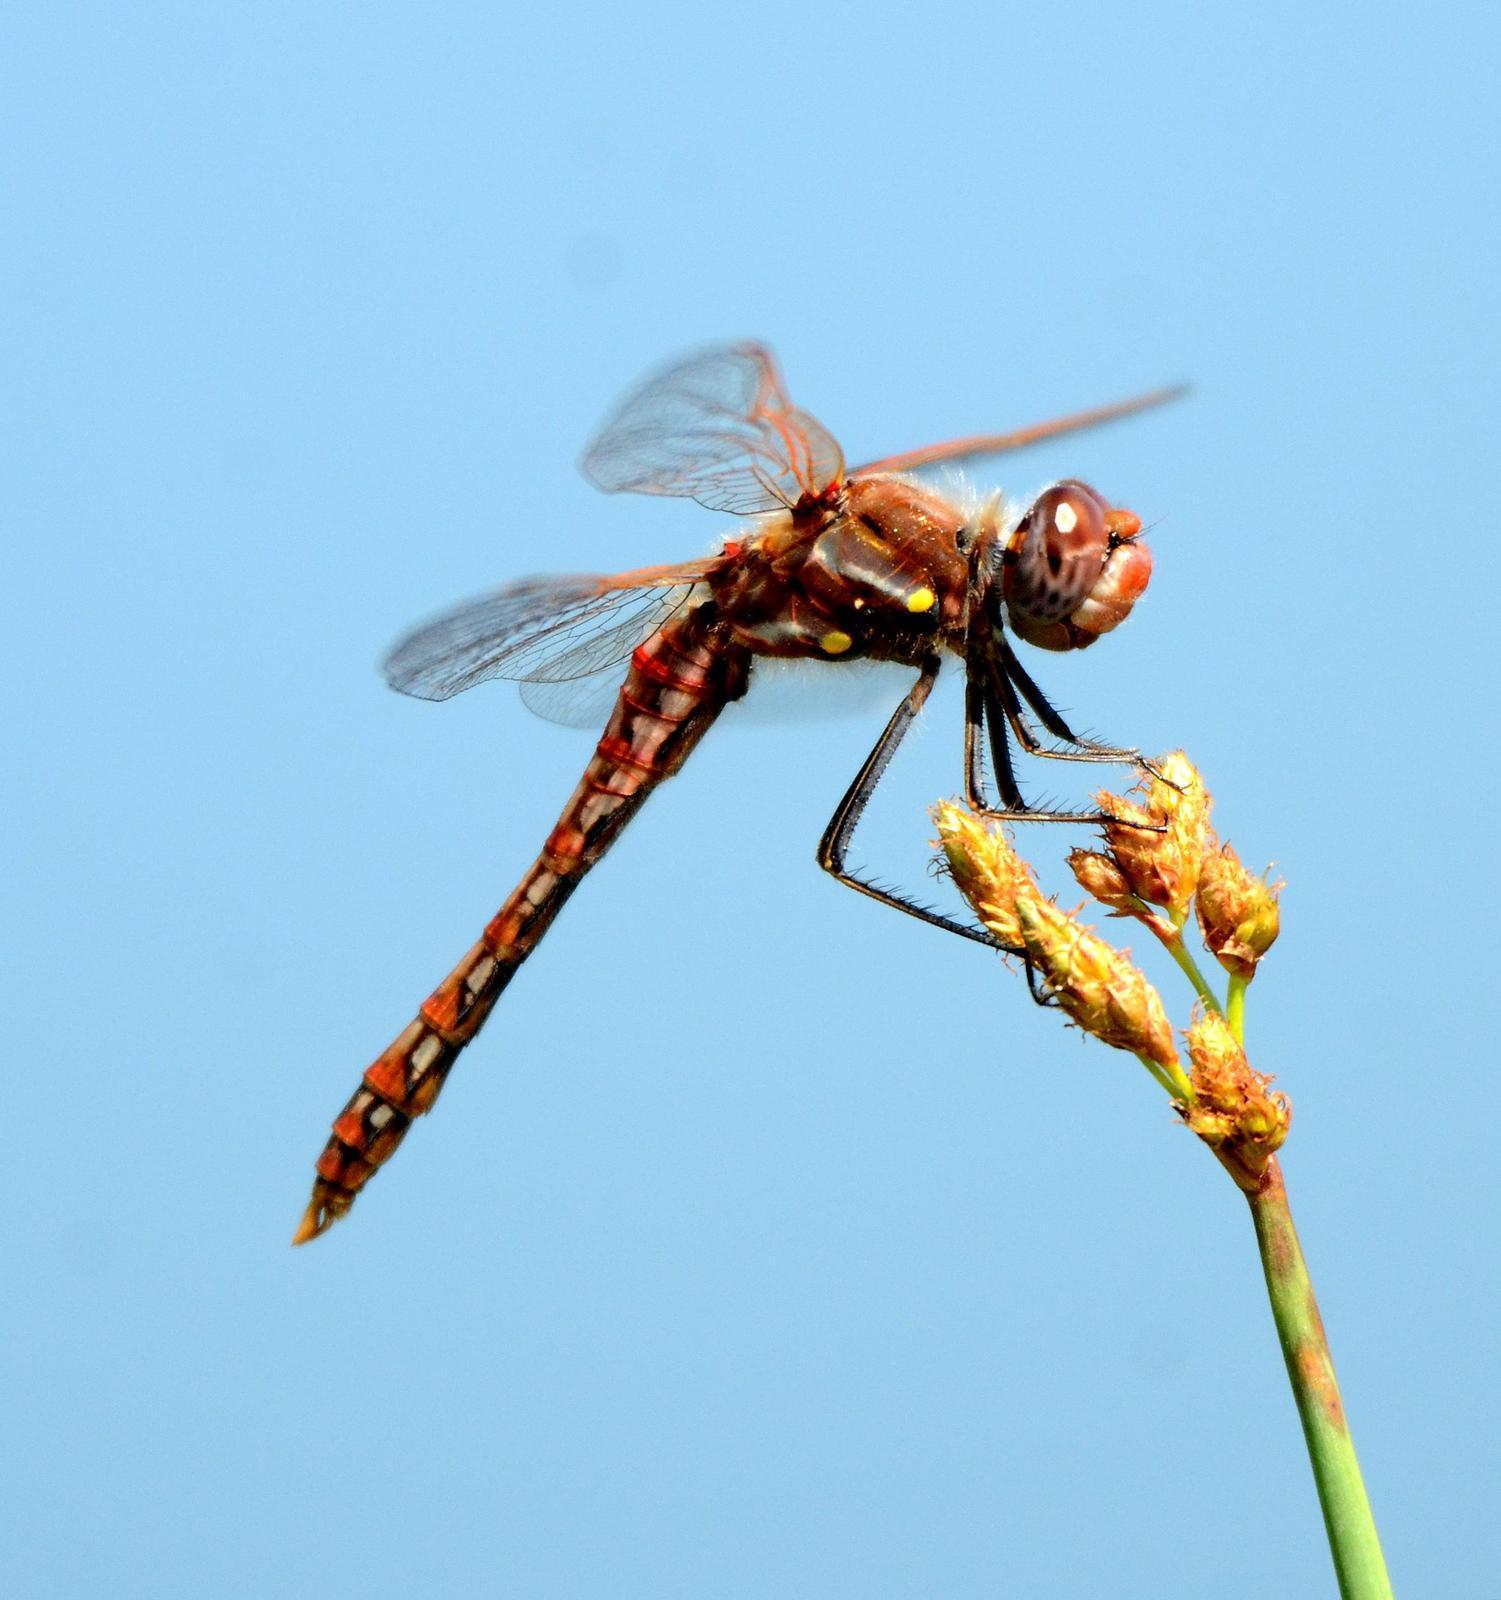 Variegated Meadowhawk Photo by Steven Mlodinow